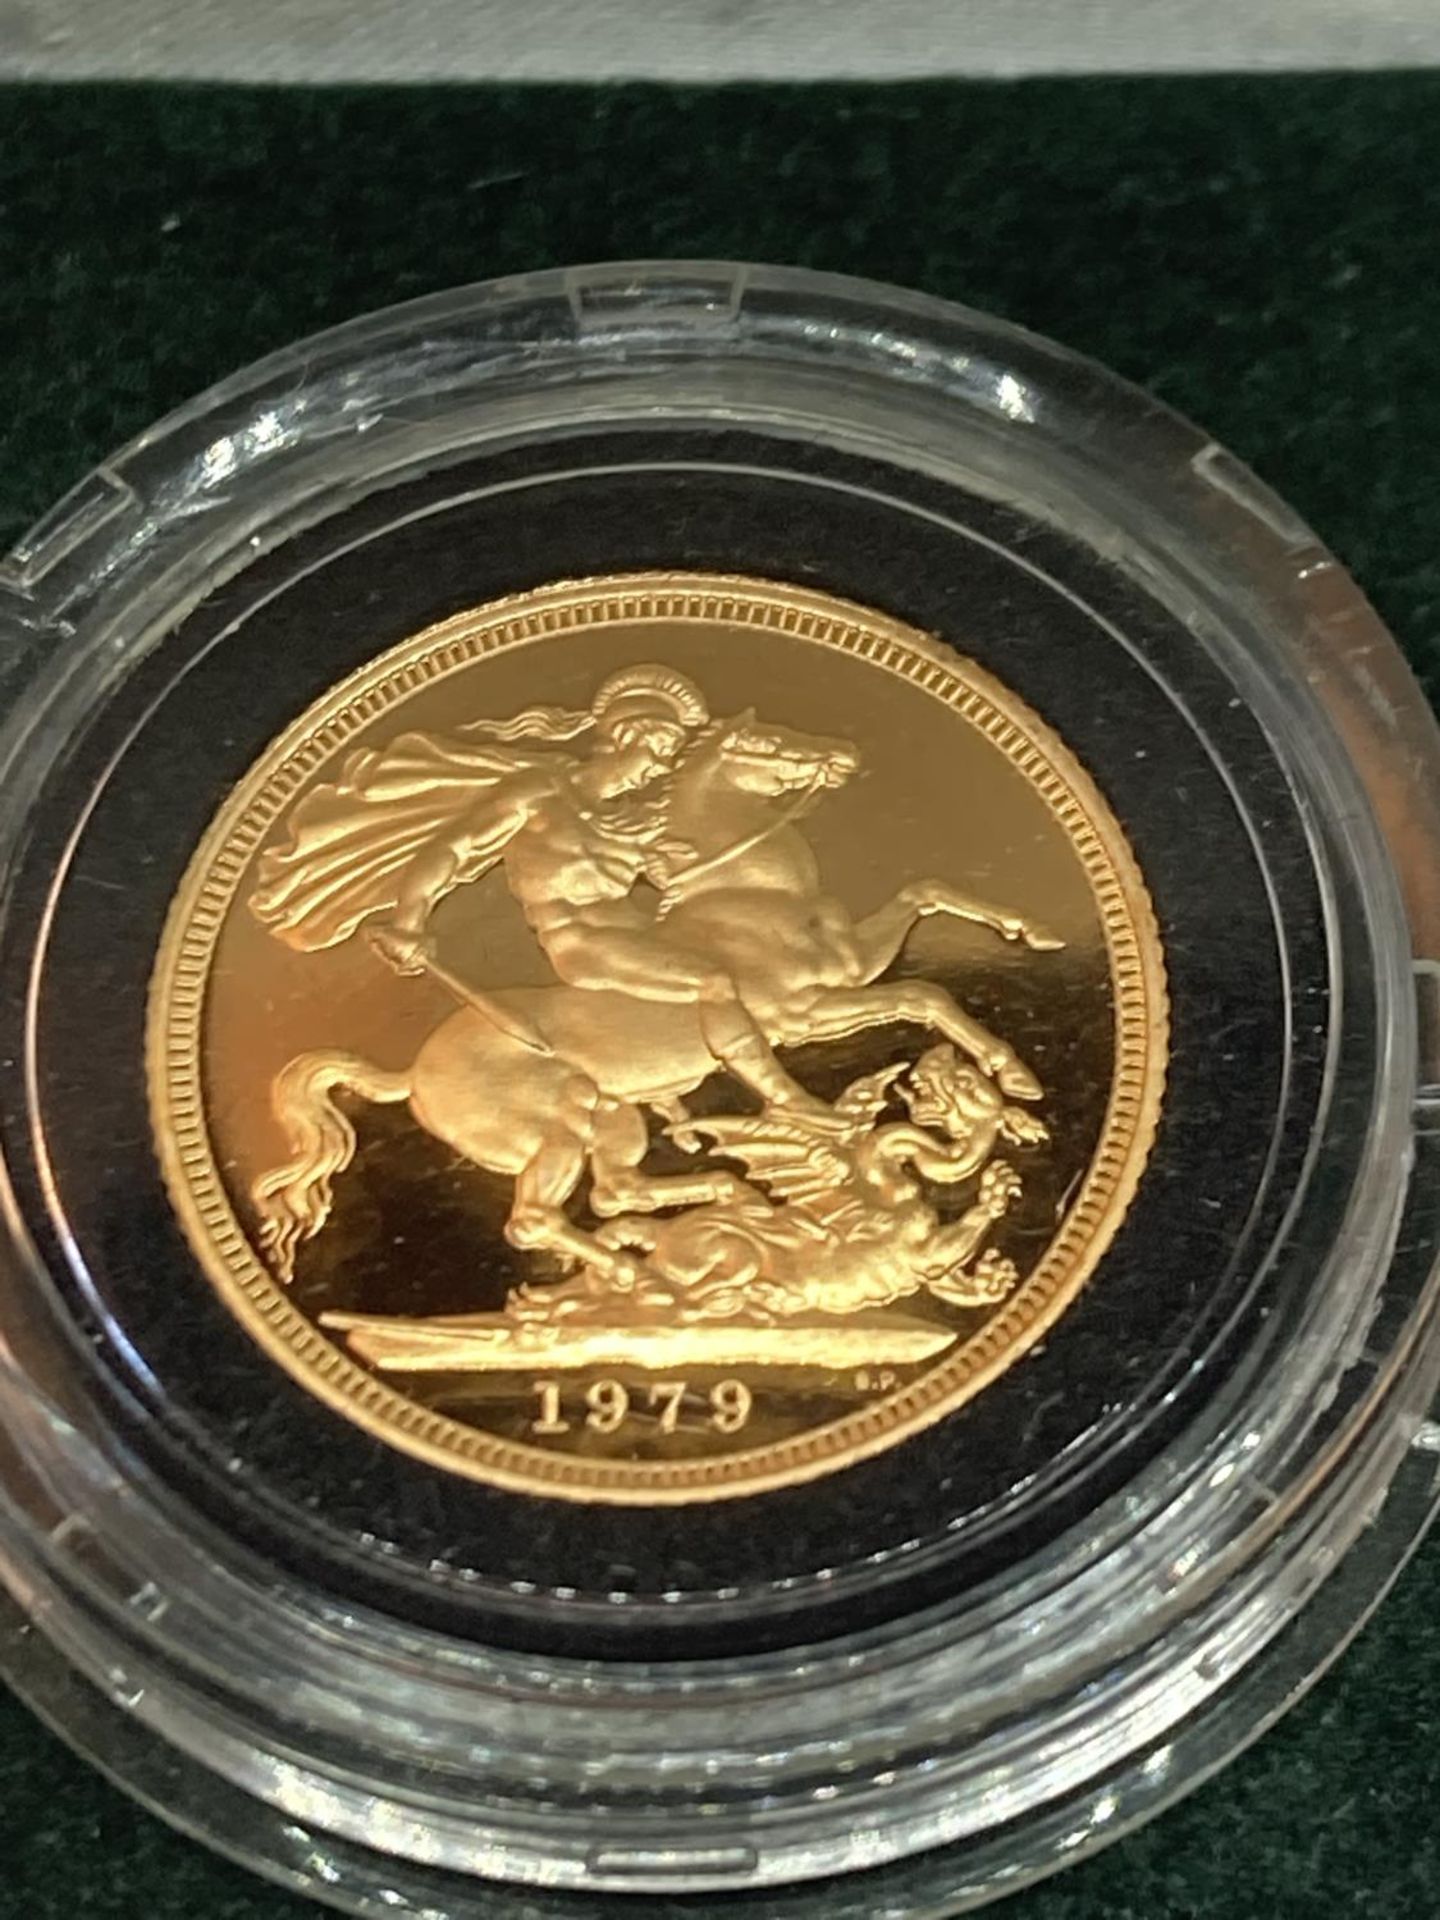 A 1979 GOLD SOVEREIGN QUEEN ELIZABETH II IN A PRESENTATION BOX - Image 2 of 5